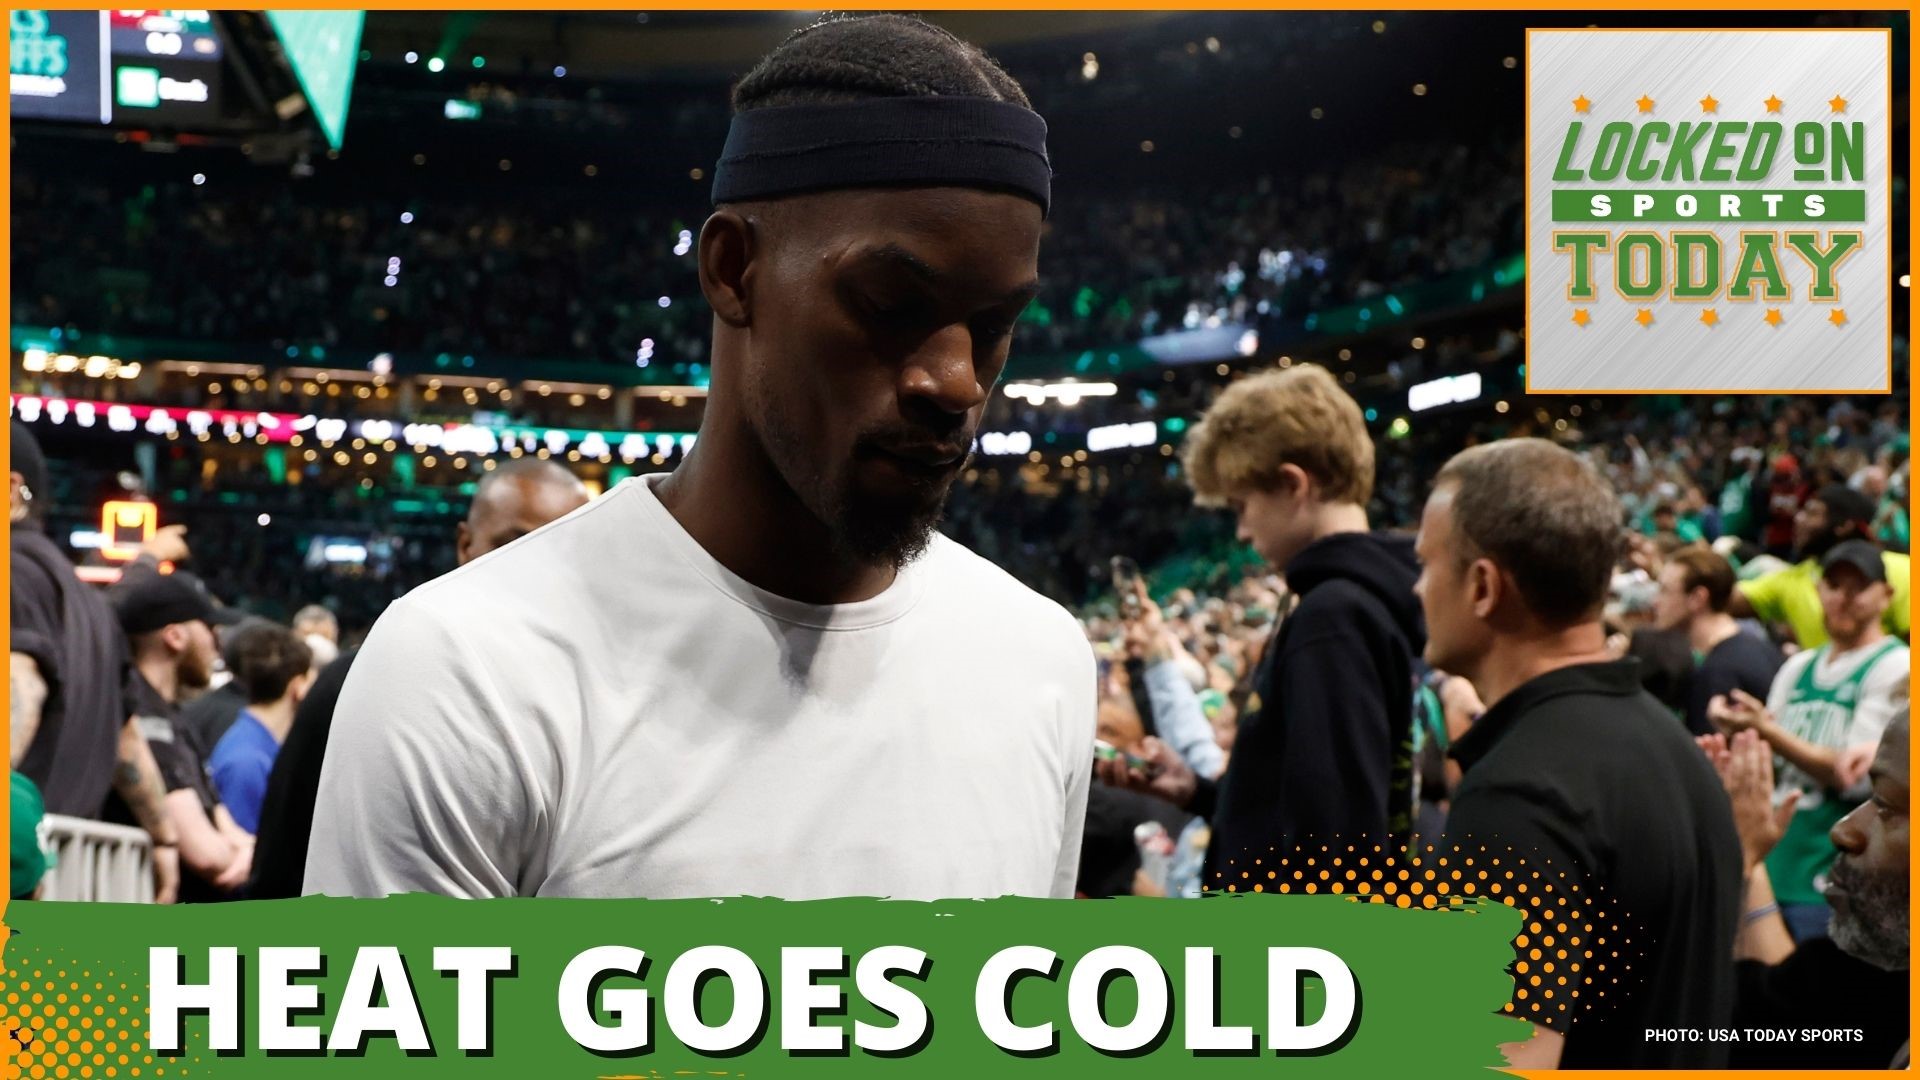 Discussing the day's top stories from the Boston Celtics winning another in NBA Eastern Conference Finals to a bonkers finish in Stanley Cup playoffs.